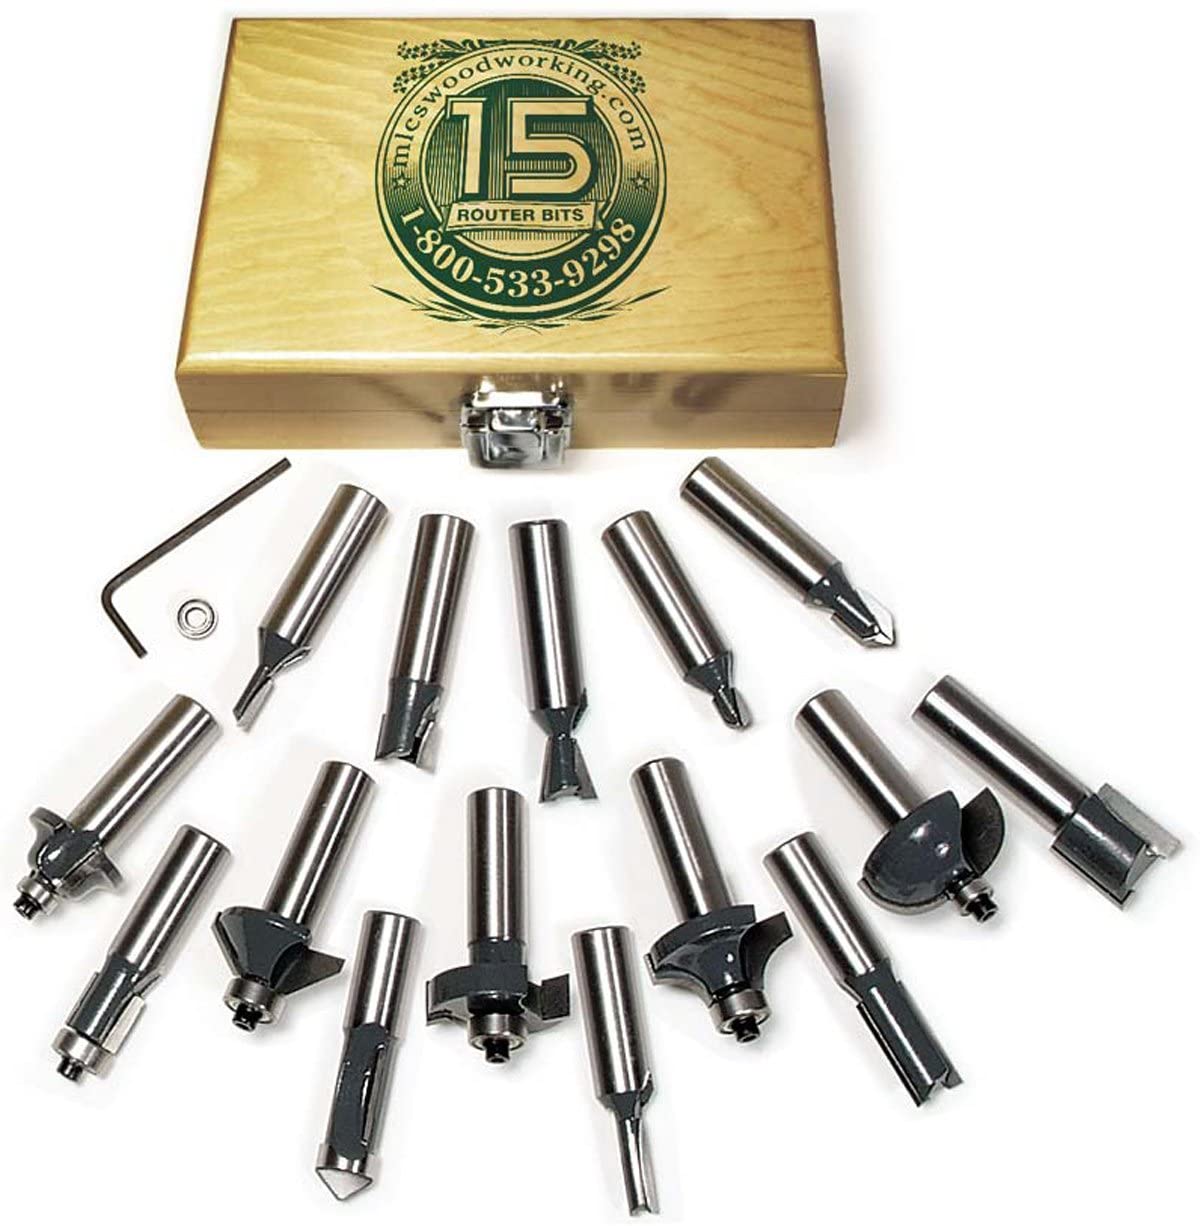 MLCS 8377 15-Piece Router Bit Set with Carbide-Tipped 1/2-Inch Shanks